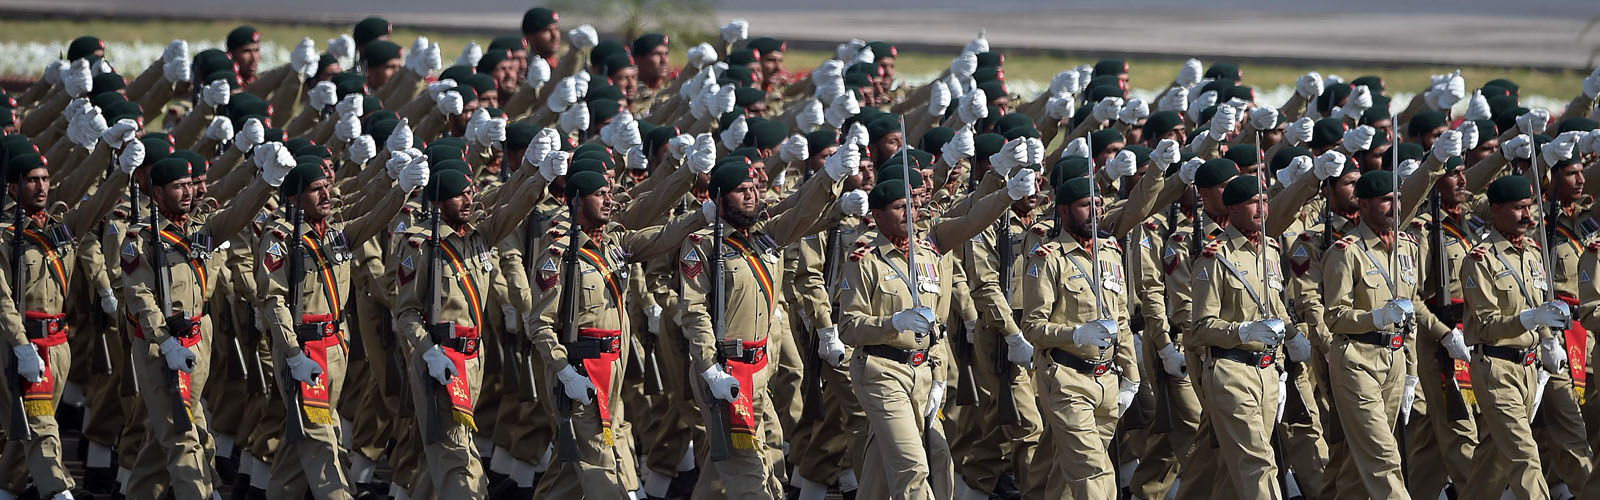 In pictures: Pakistan's military might